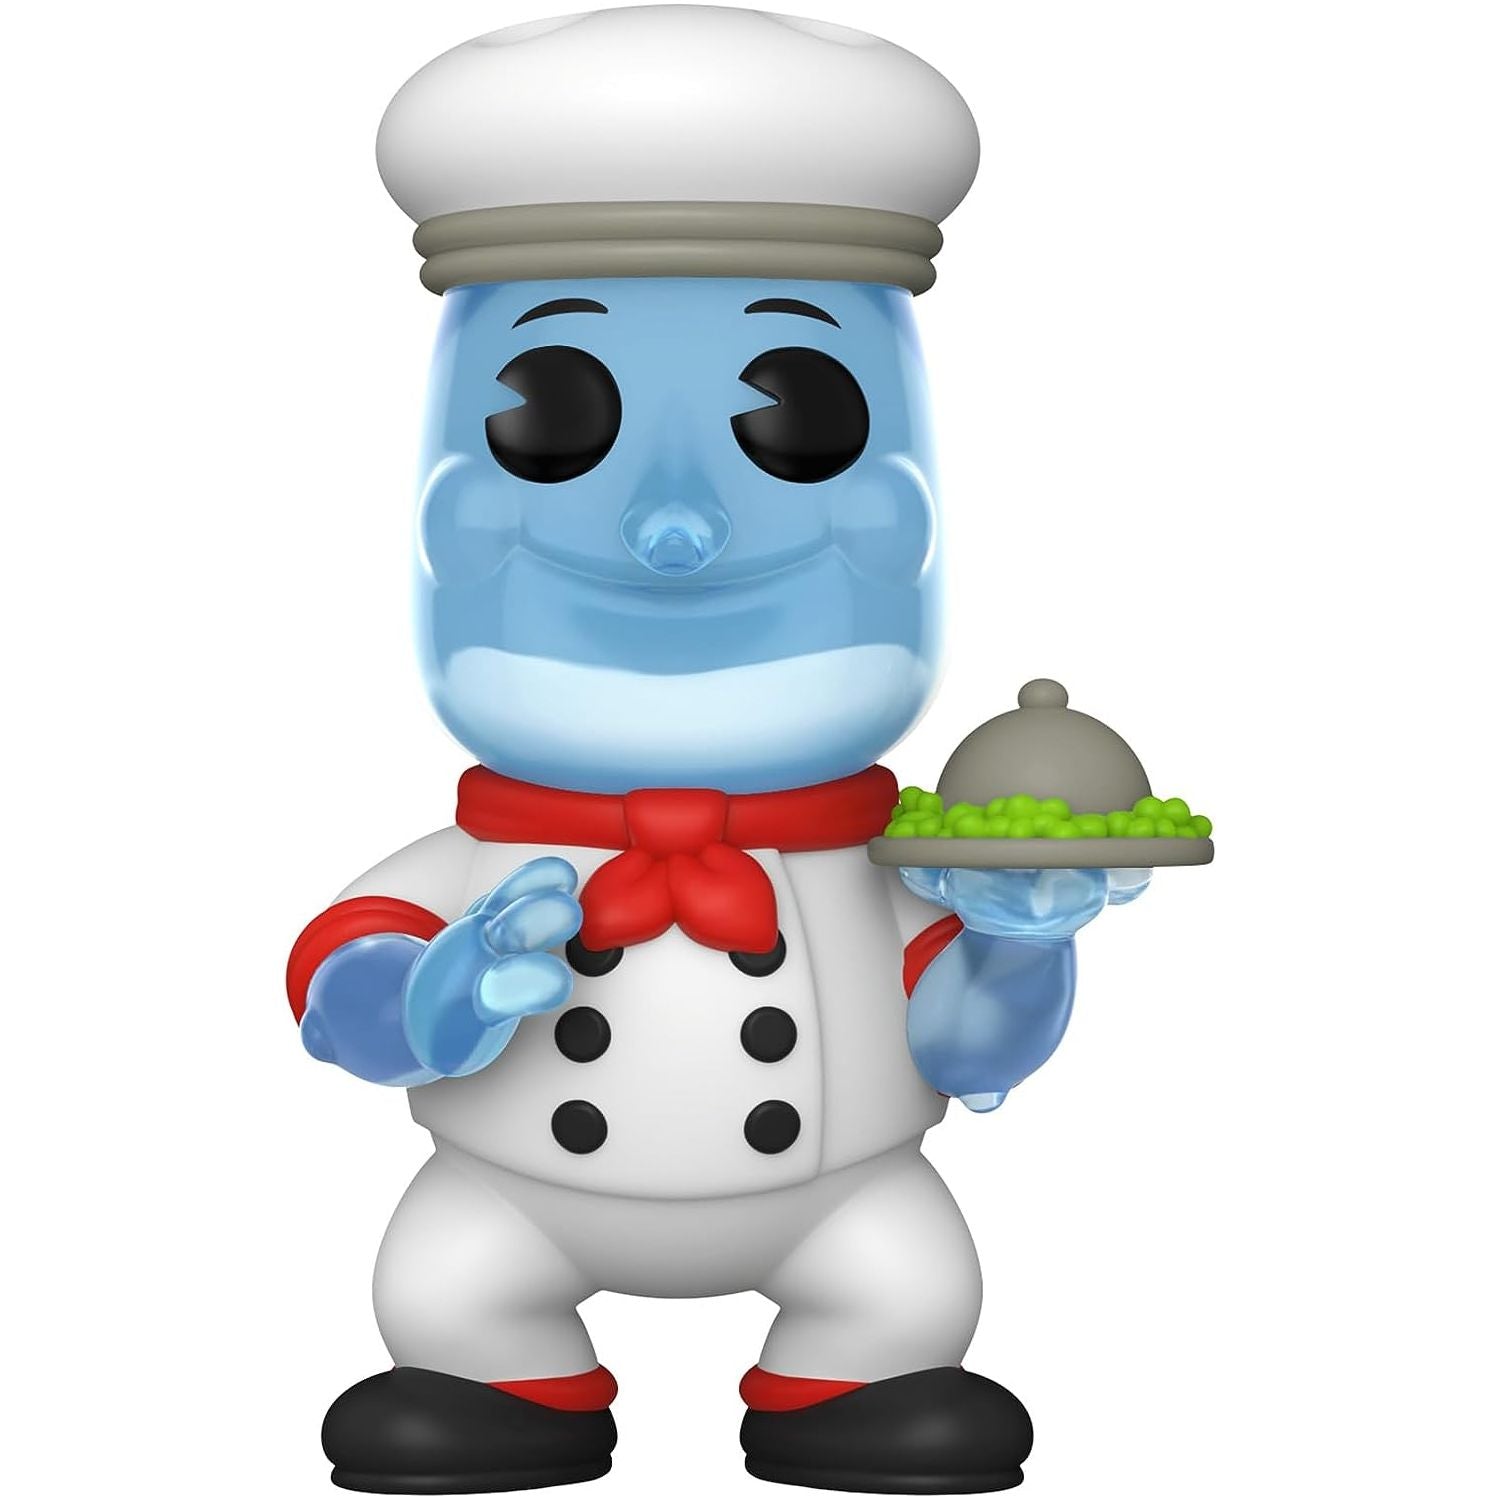 Funko Pop! Games Cuphead - Chef Saltbaker with Chase